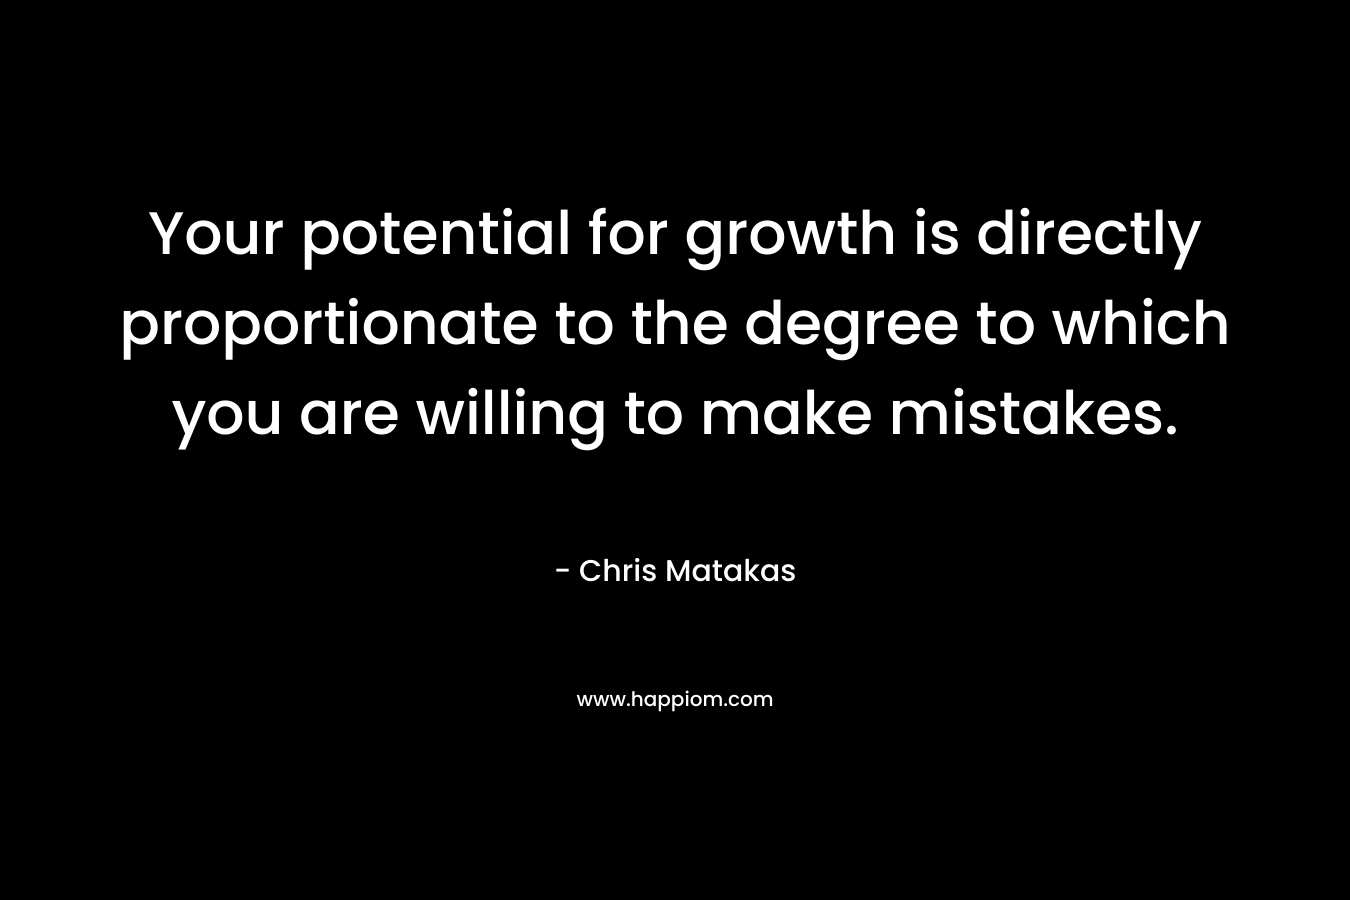 Your potential for growth is directly proportionate to the degree to which you are willing to make mistakes.